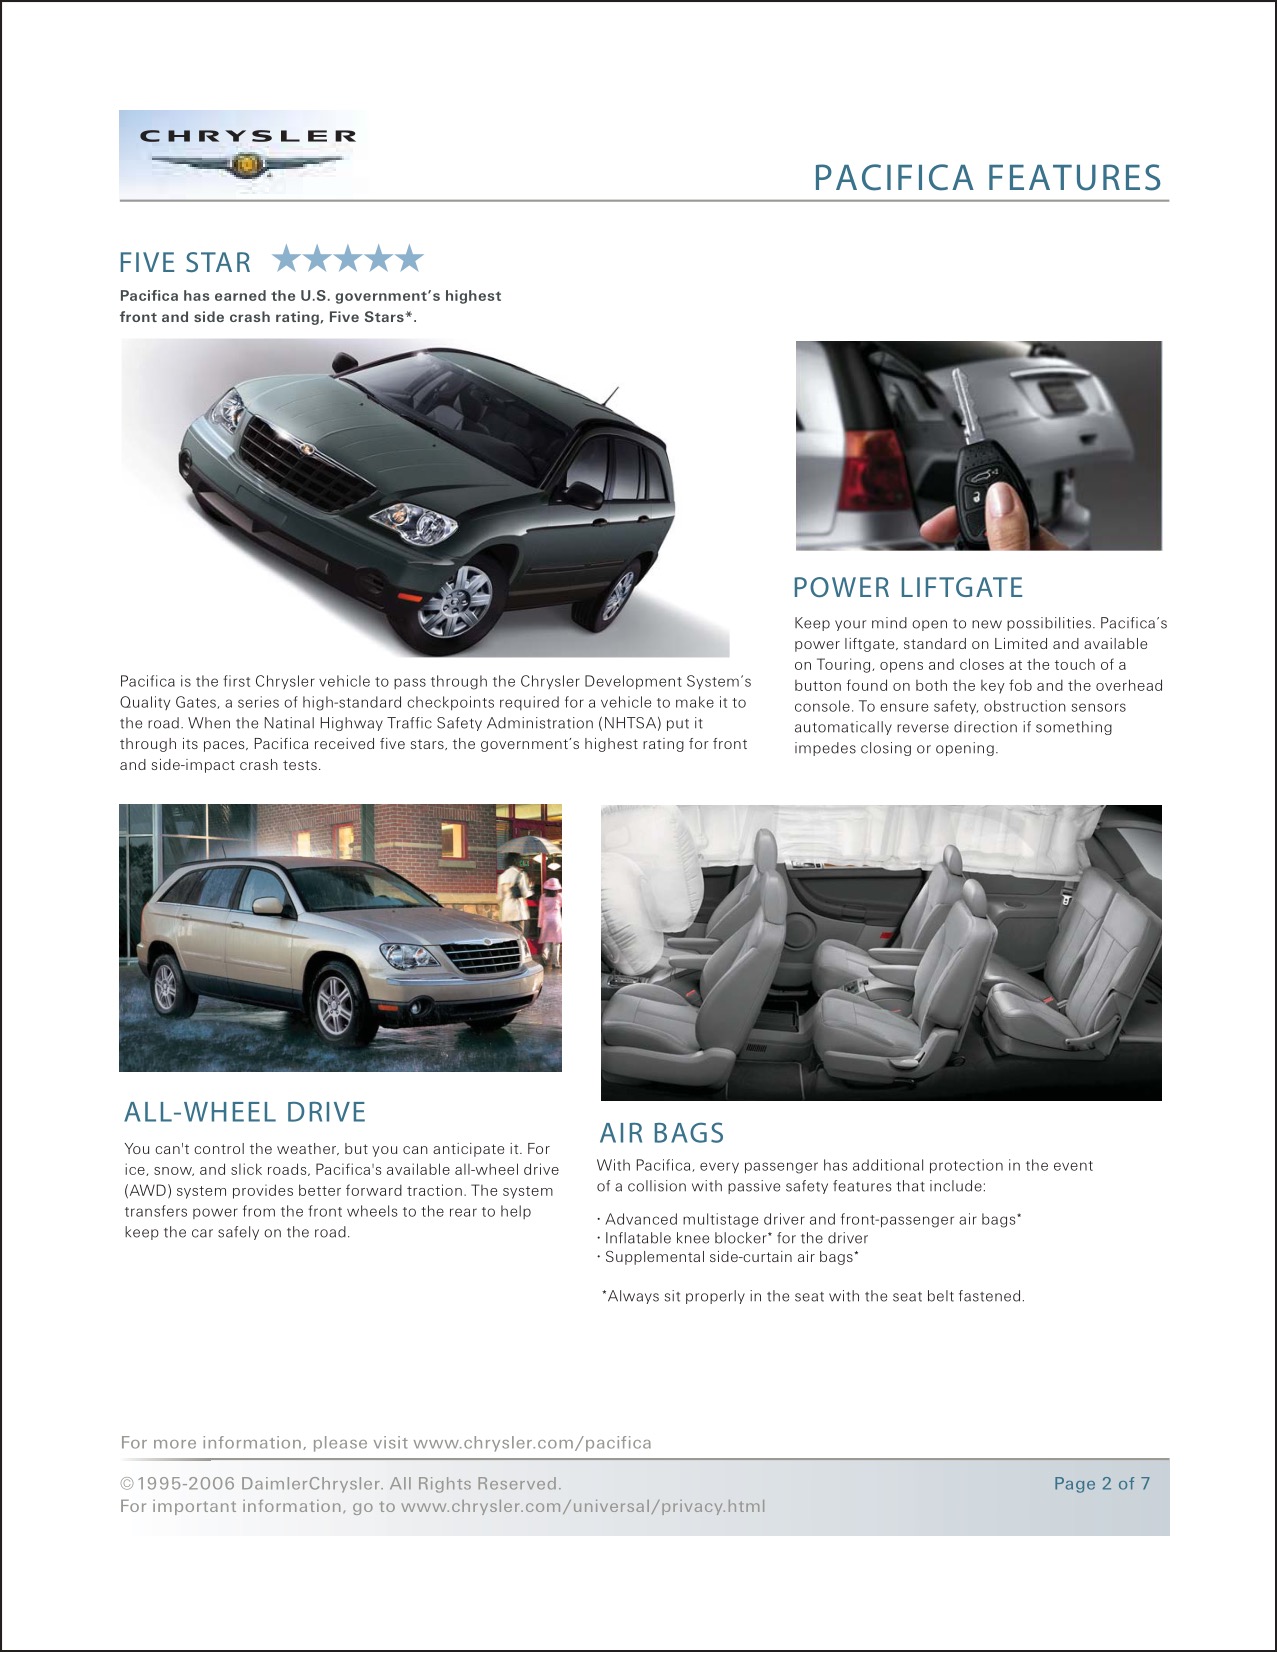 2007 Chrysler Pacifica Brochure Page 7